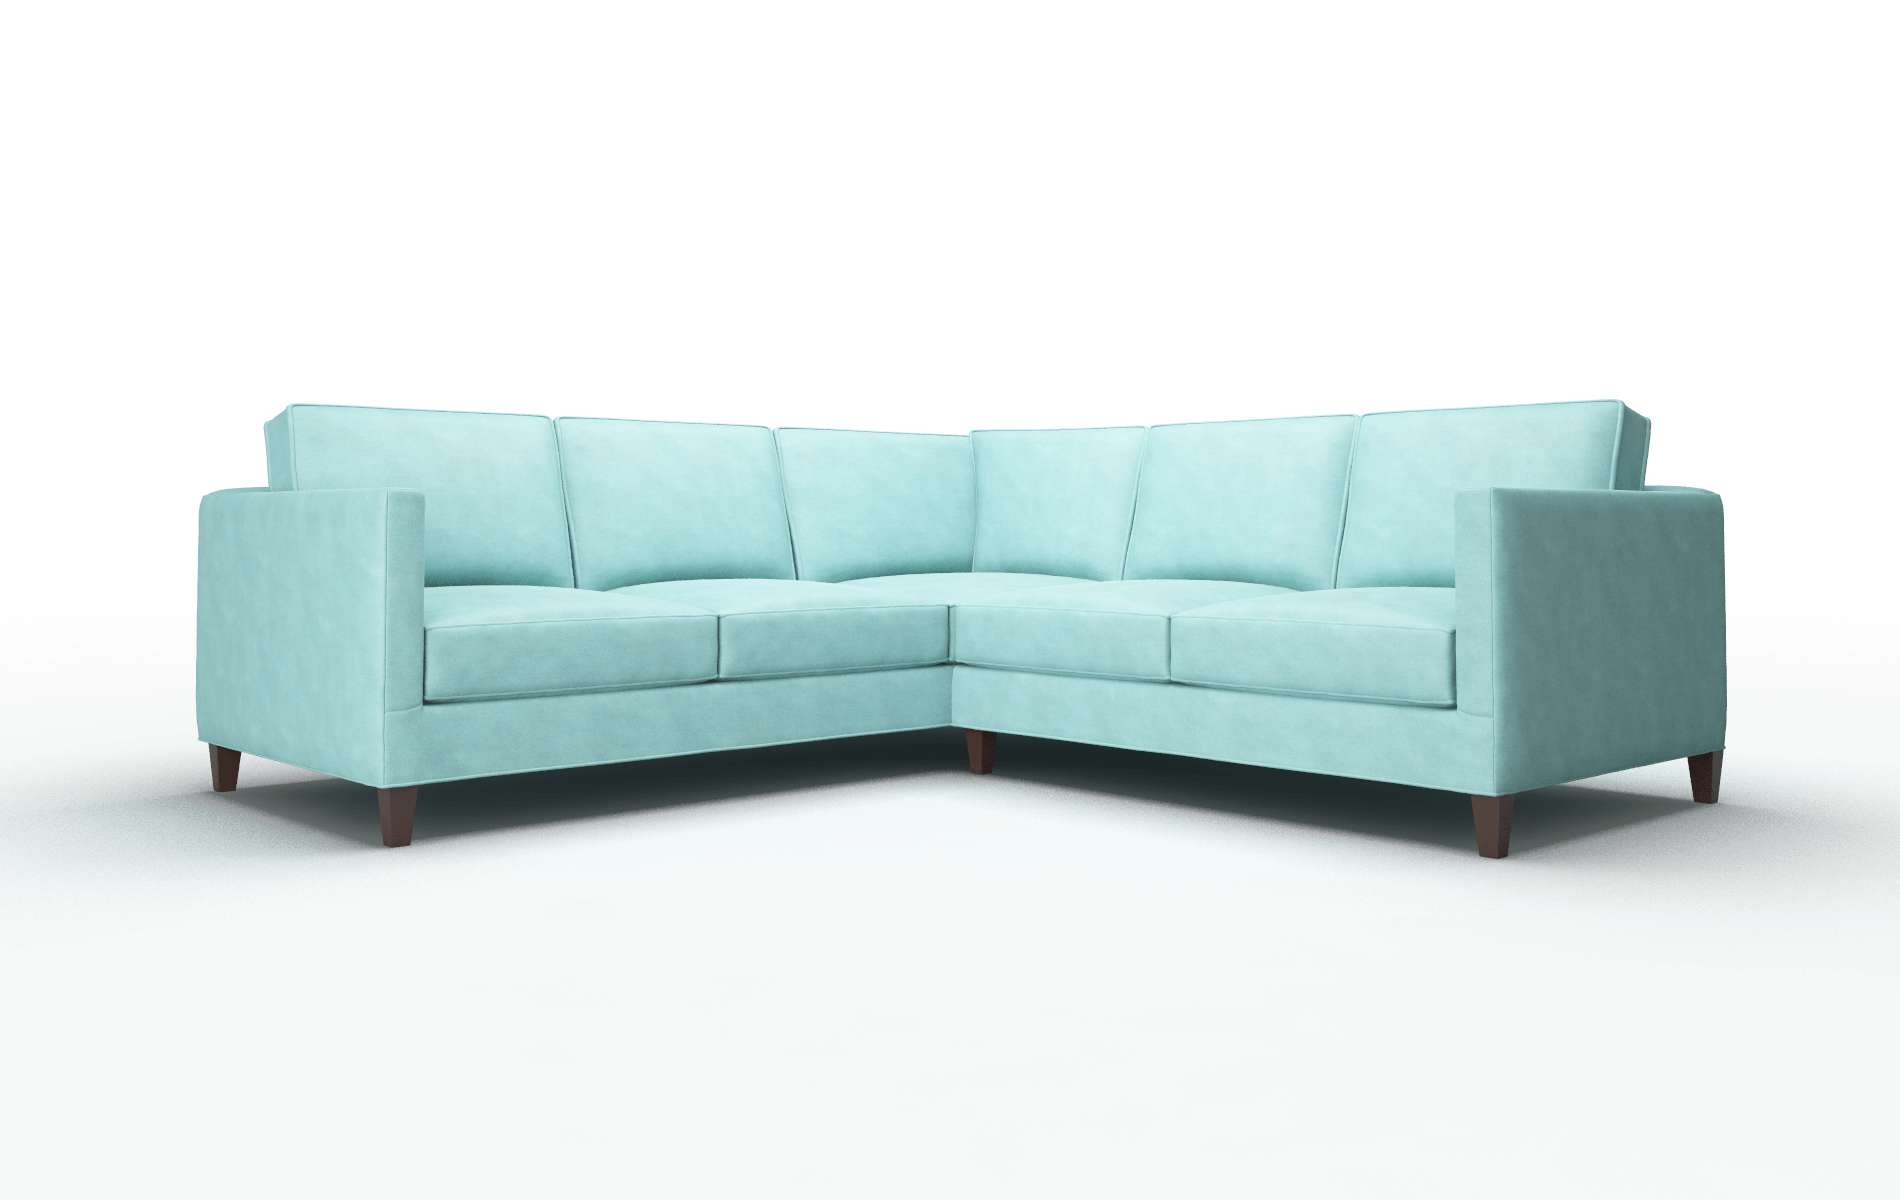 Alps Curious Turquoise Sectional espresso legs